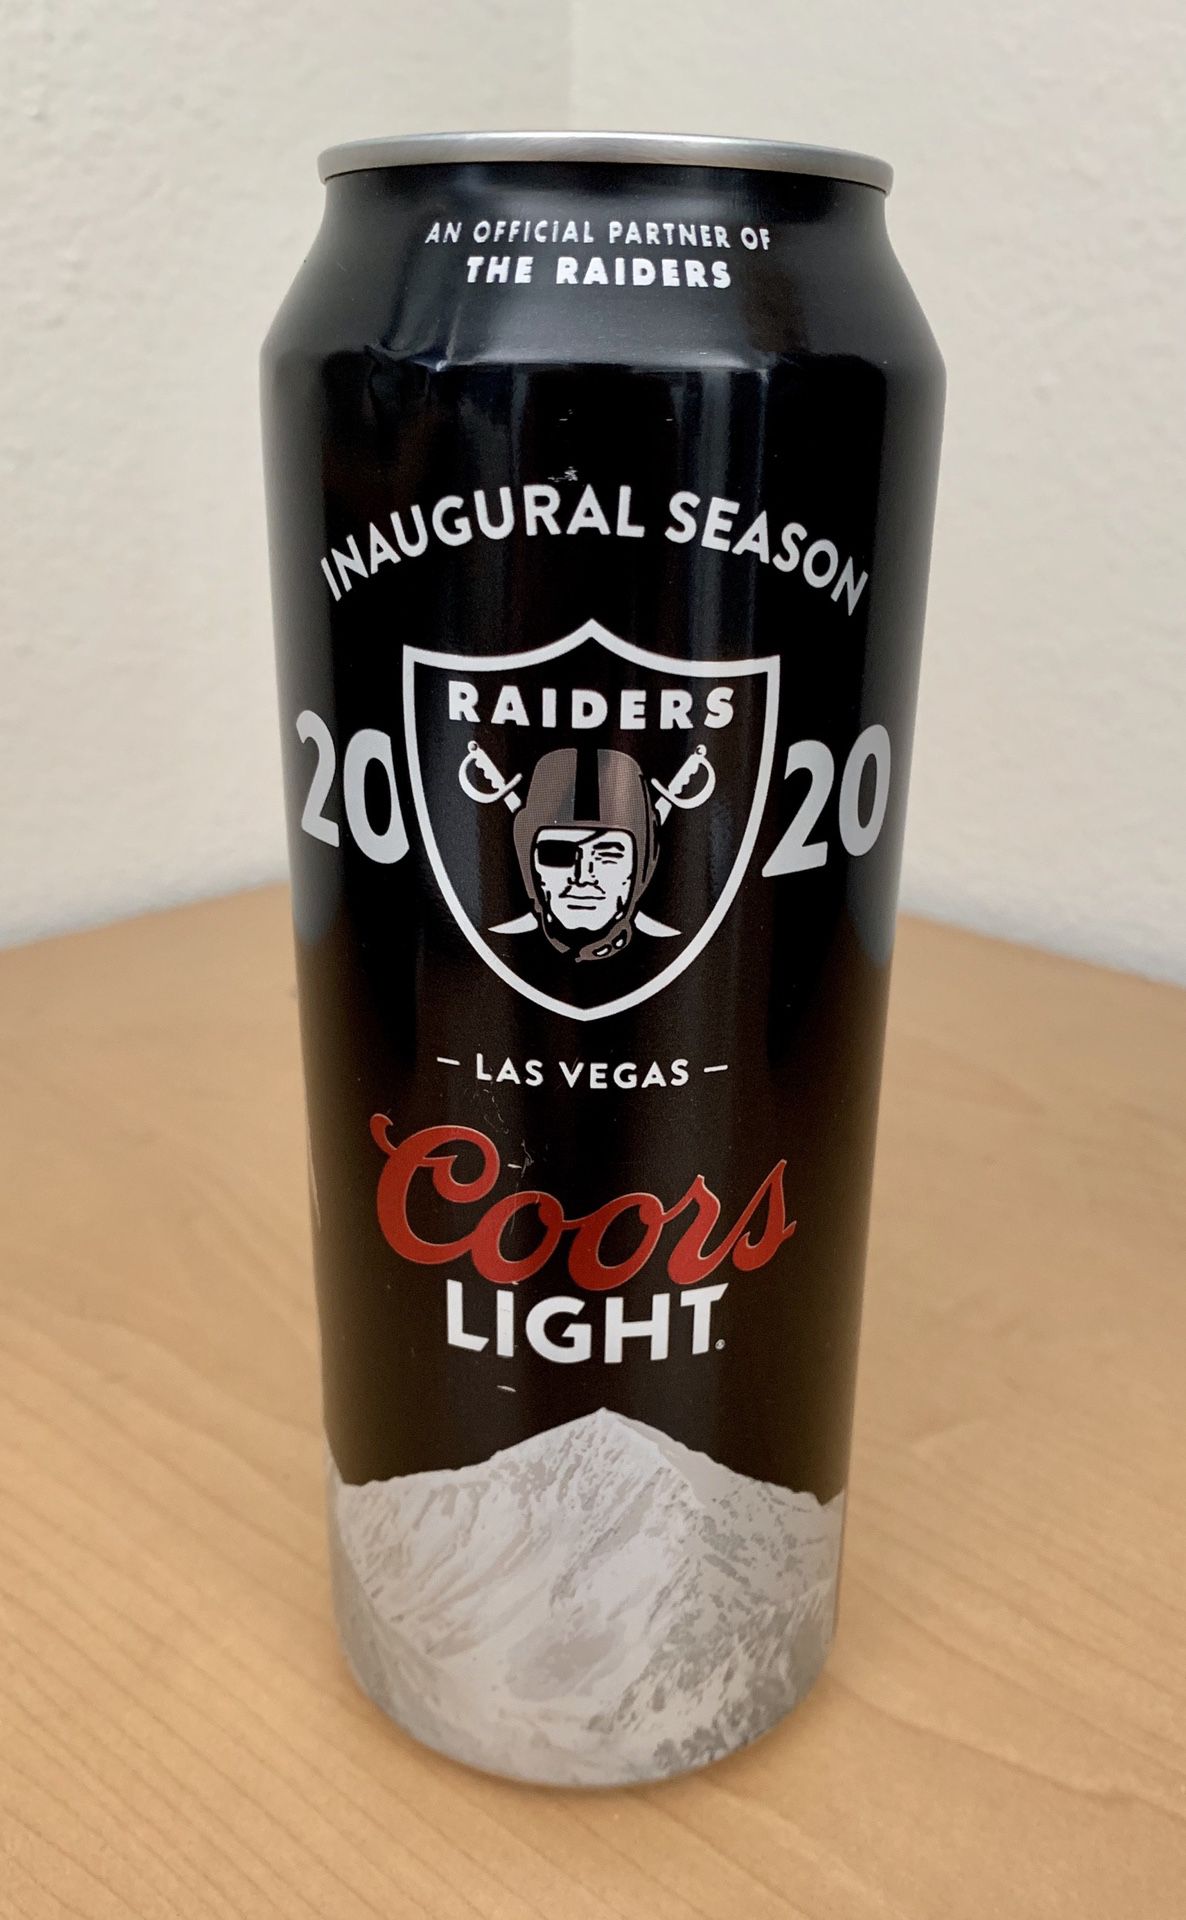 Raiders - Coors Light commemorative can